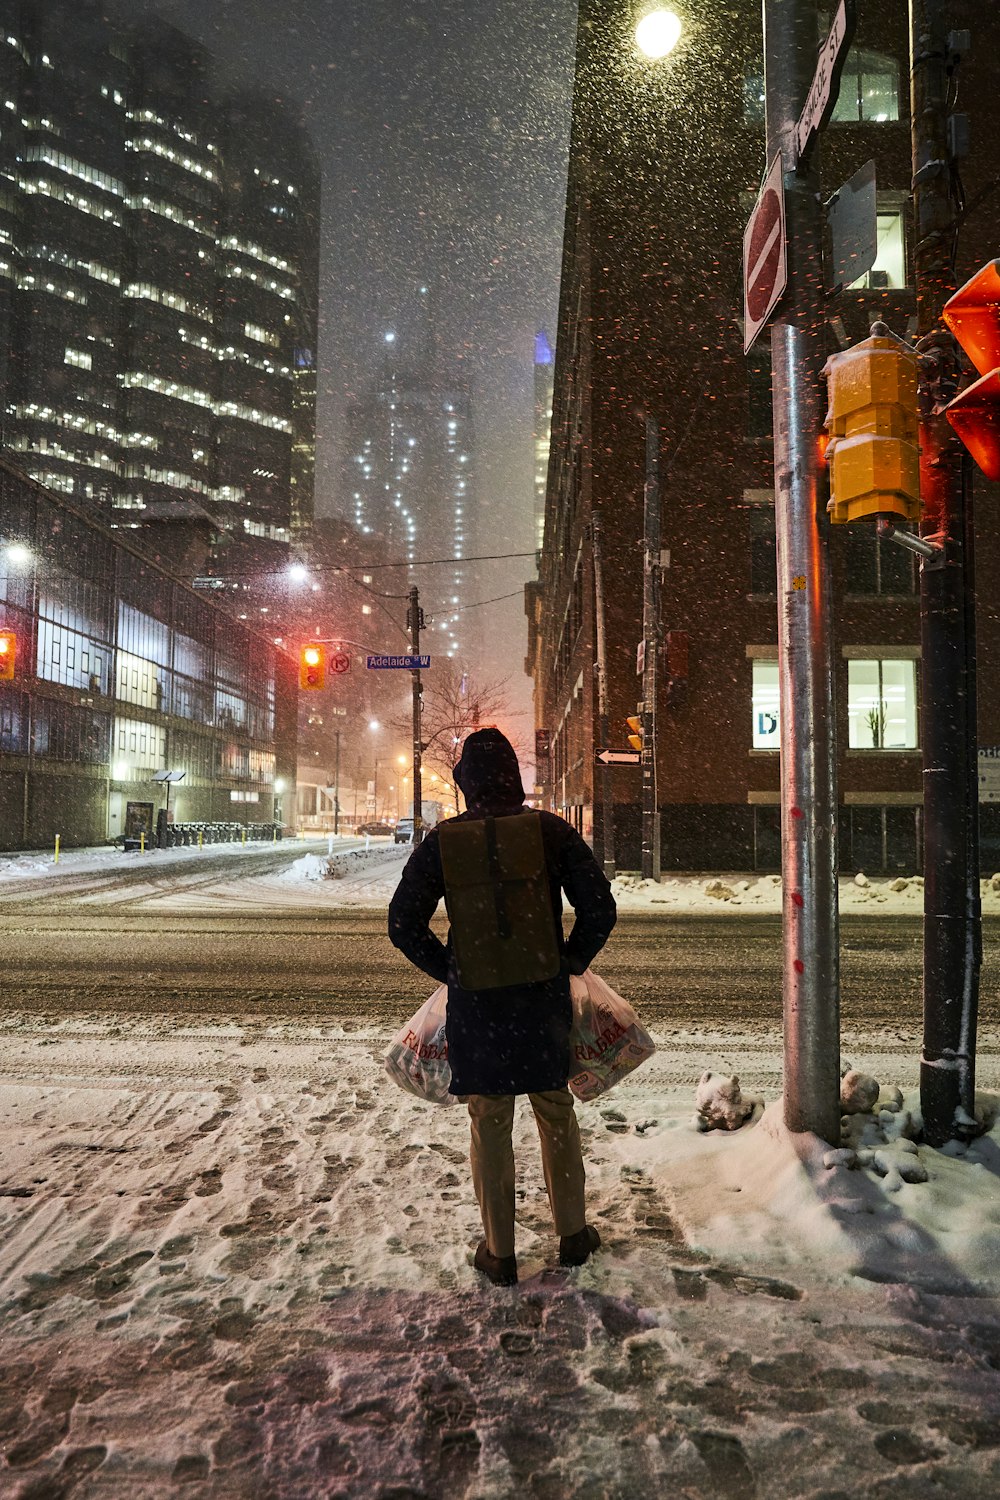 a person standing on a snowy street at night